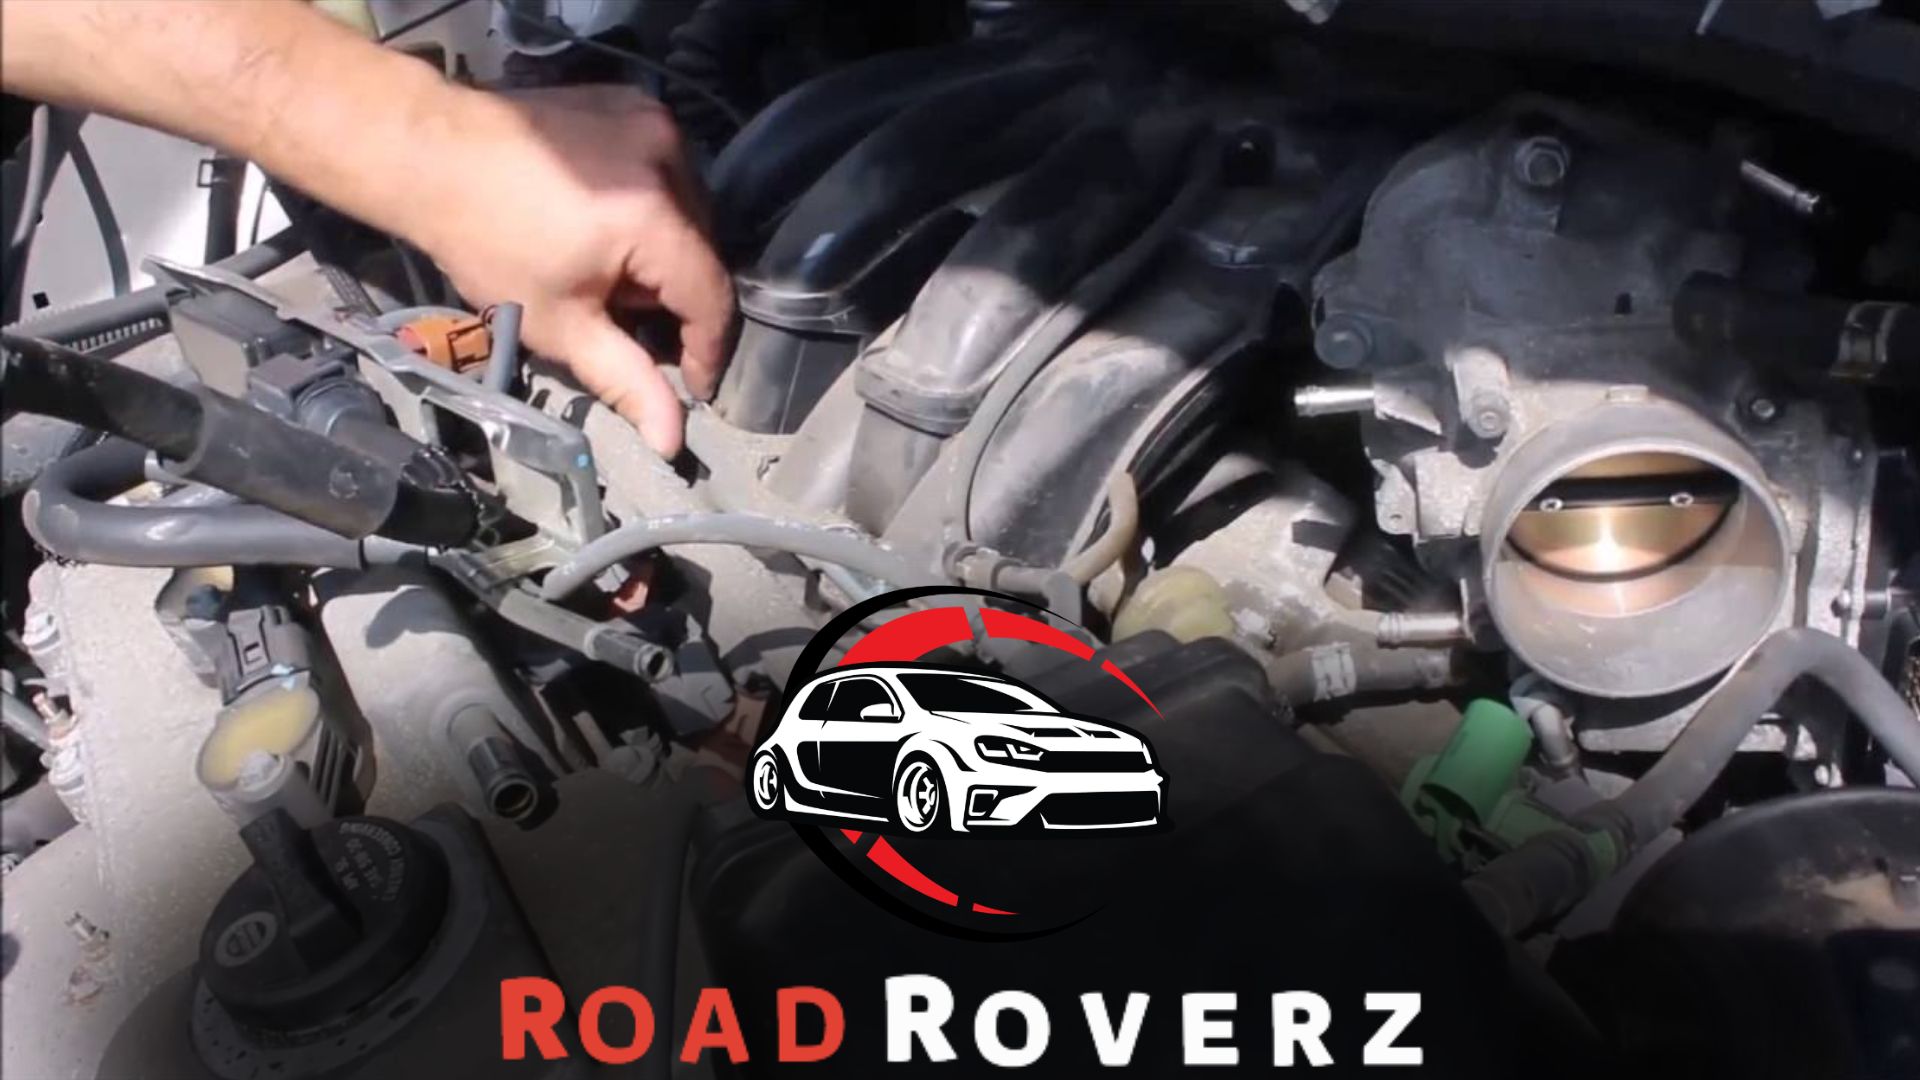 Toyota Sienna Spark Plug Replacement